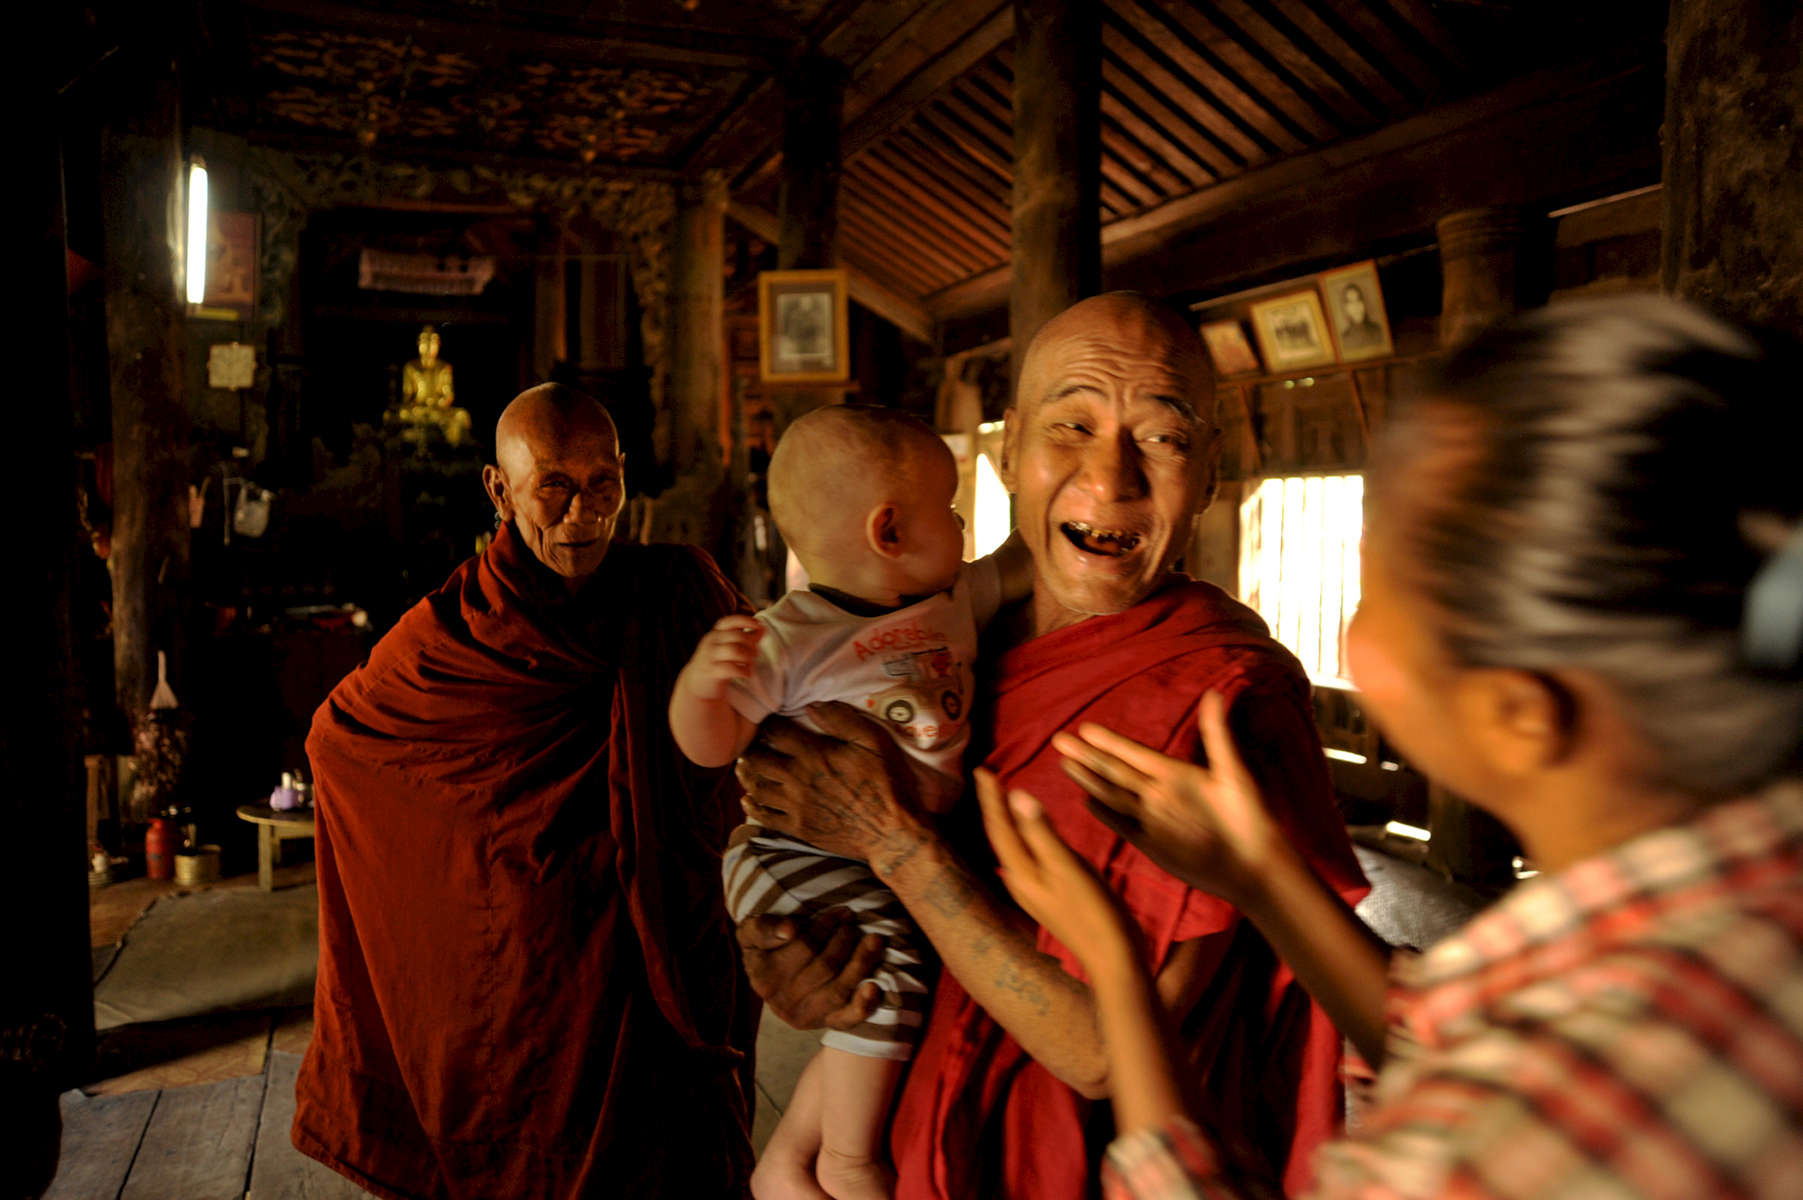 Burmese monks in Tingaza Kyaung, an old wooden monastery located southwest of Mandalay, Myanmar 2009